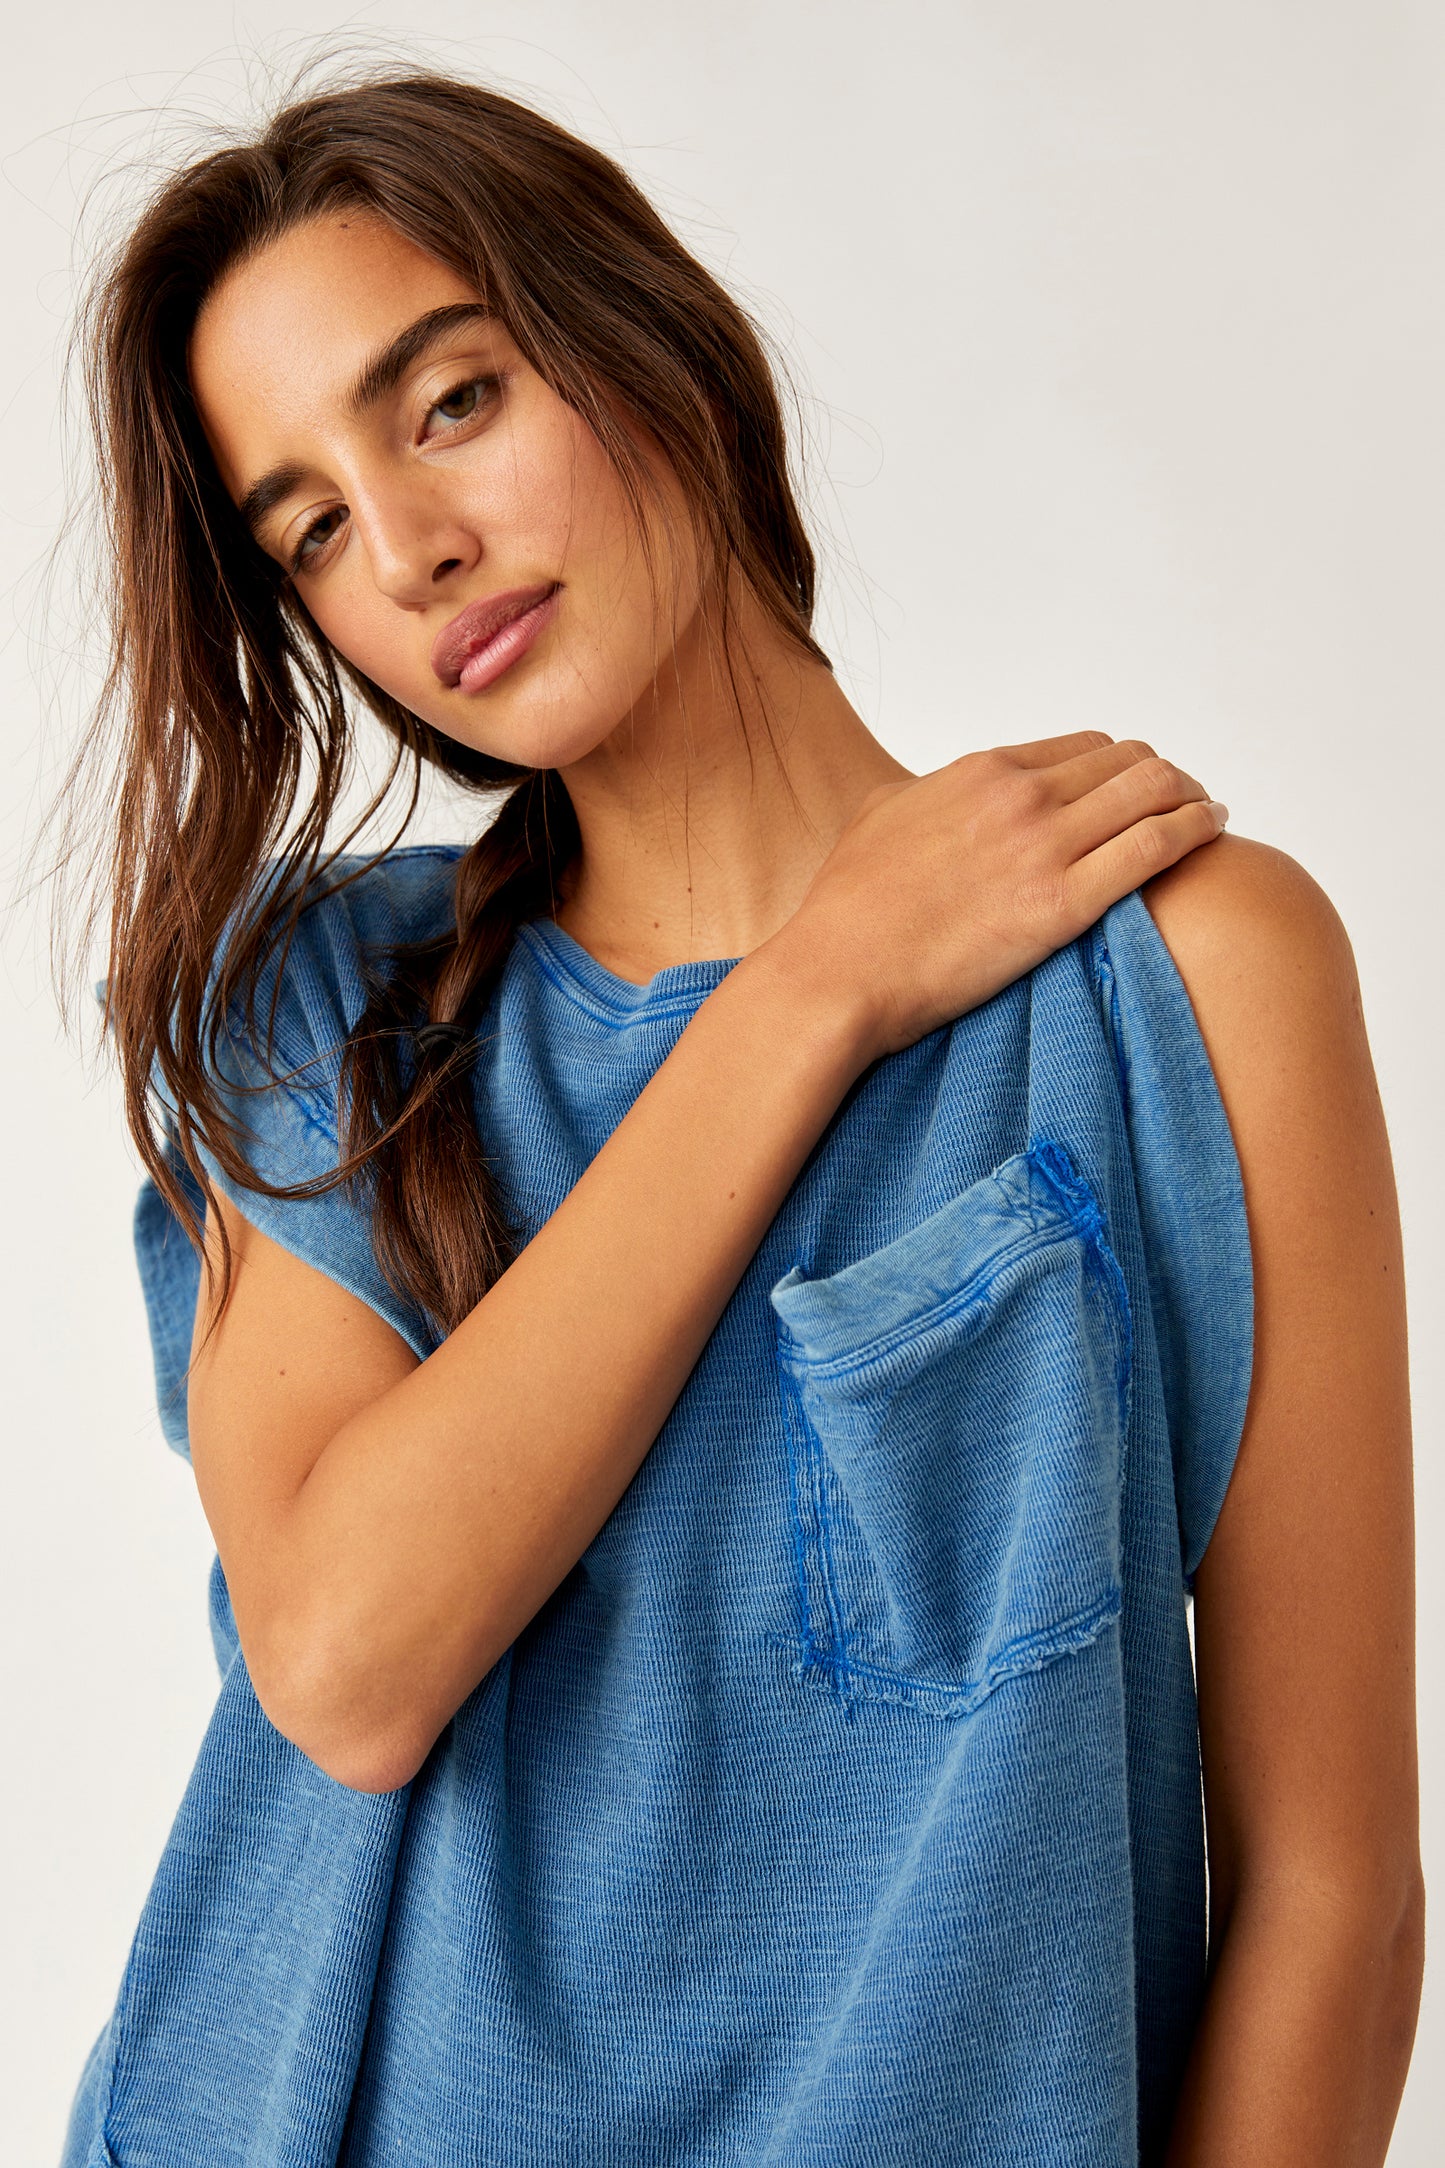 Free People: Our Time Tee - Cobalt Blue